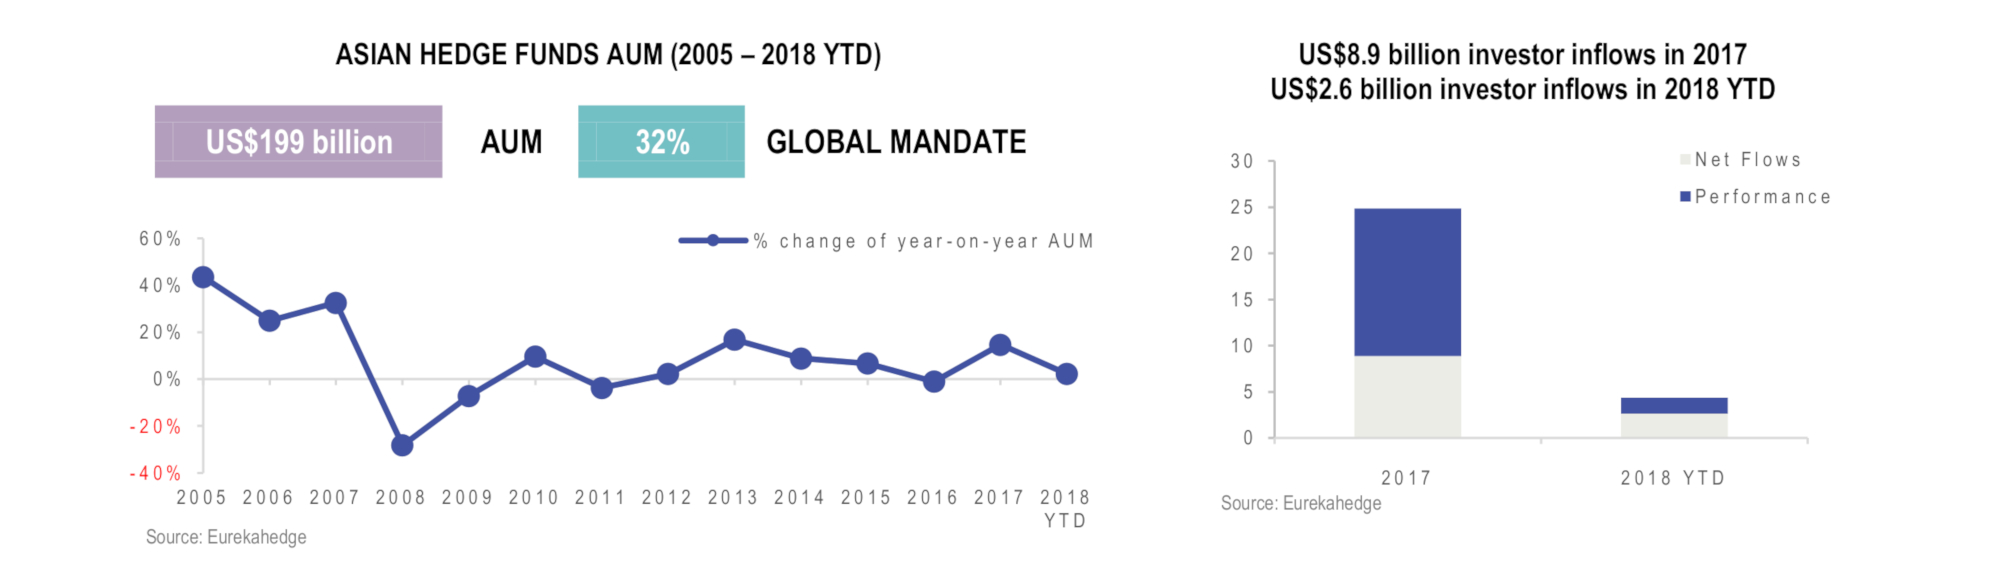 Asian Hedge Funds Infographic April 2018 - AUM